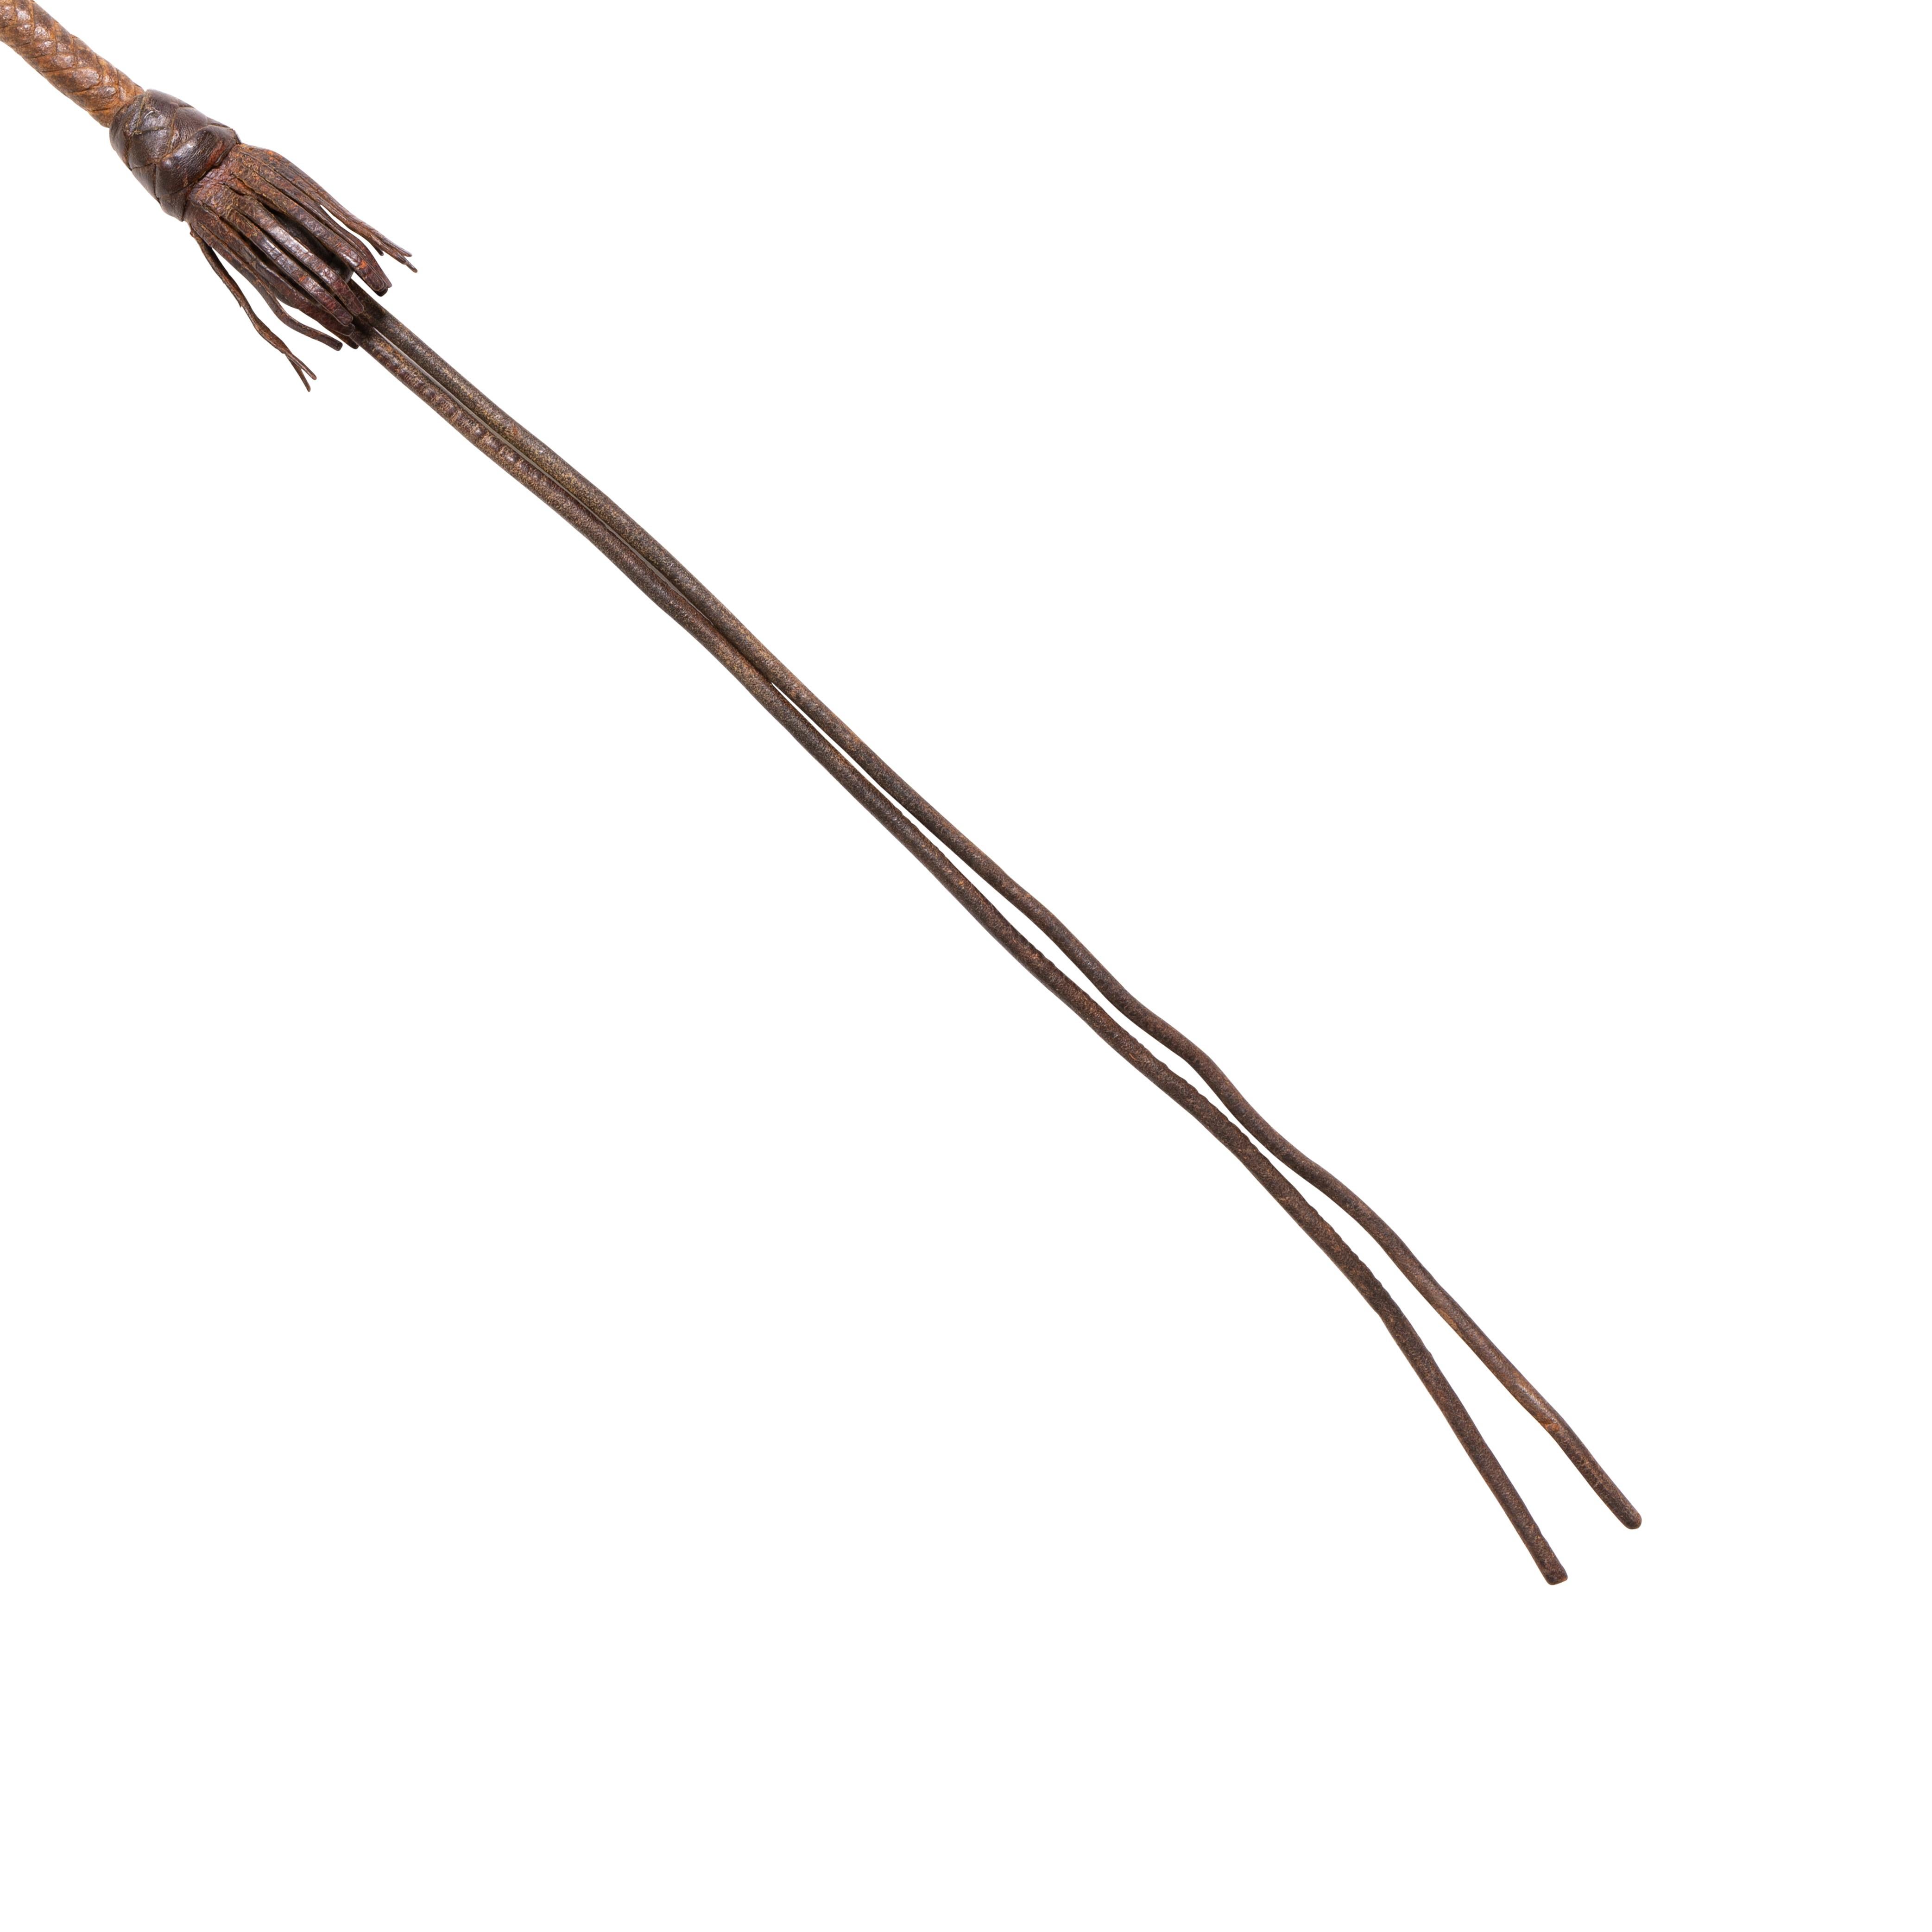 Two-tone leather quirt with fringe drops. Shot filled handle.

Period: 19th century
Origin: Montana
Size: quirt 18